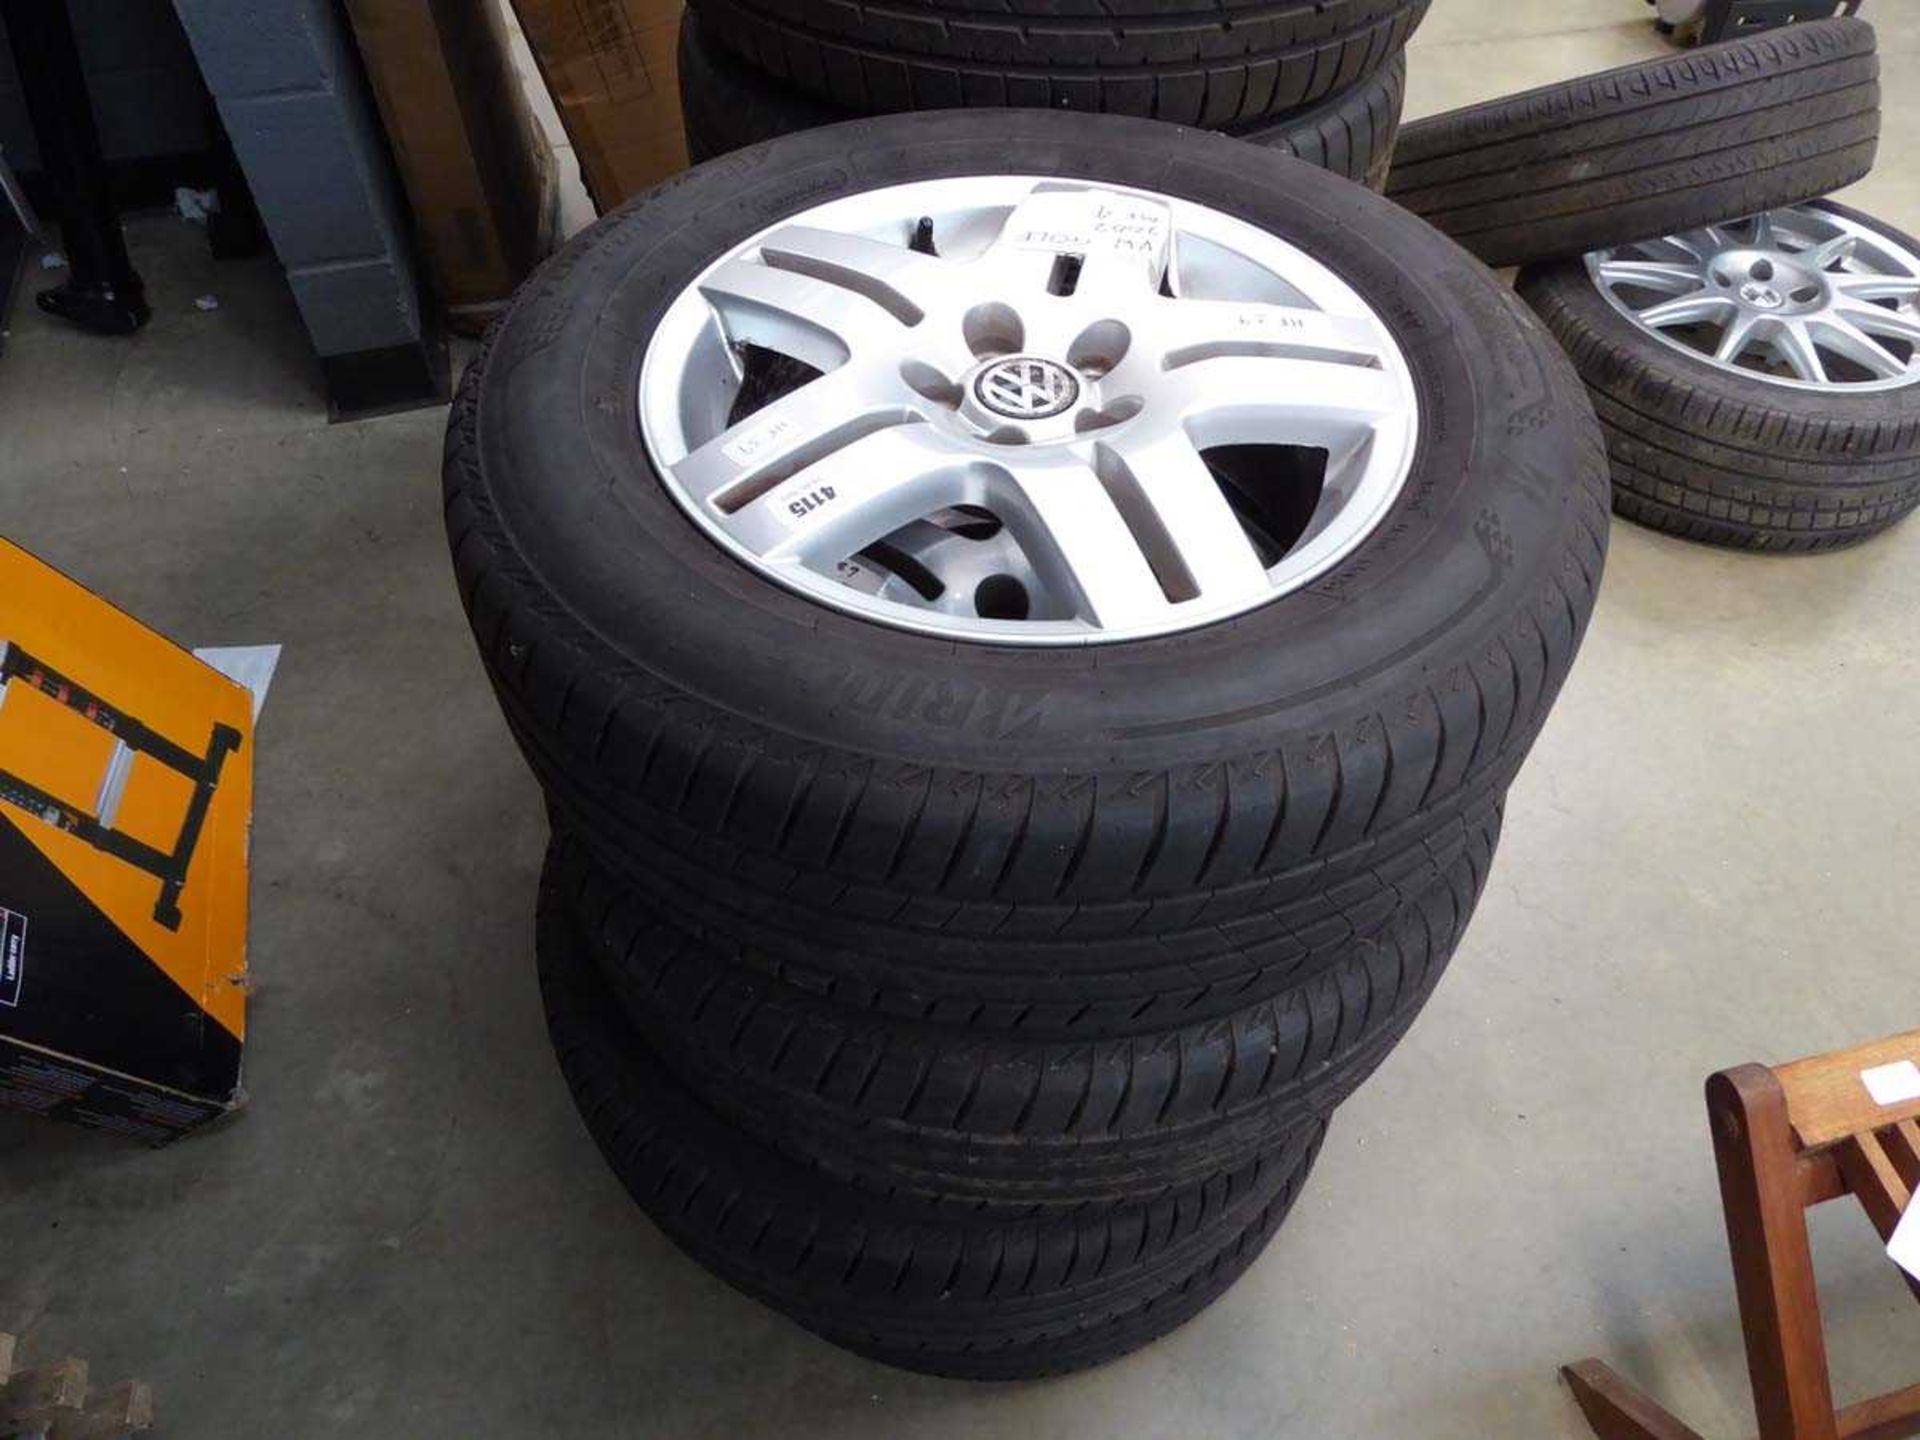 4 x VW Golf GTI Mark 4 15" alloy wheels and tyres